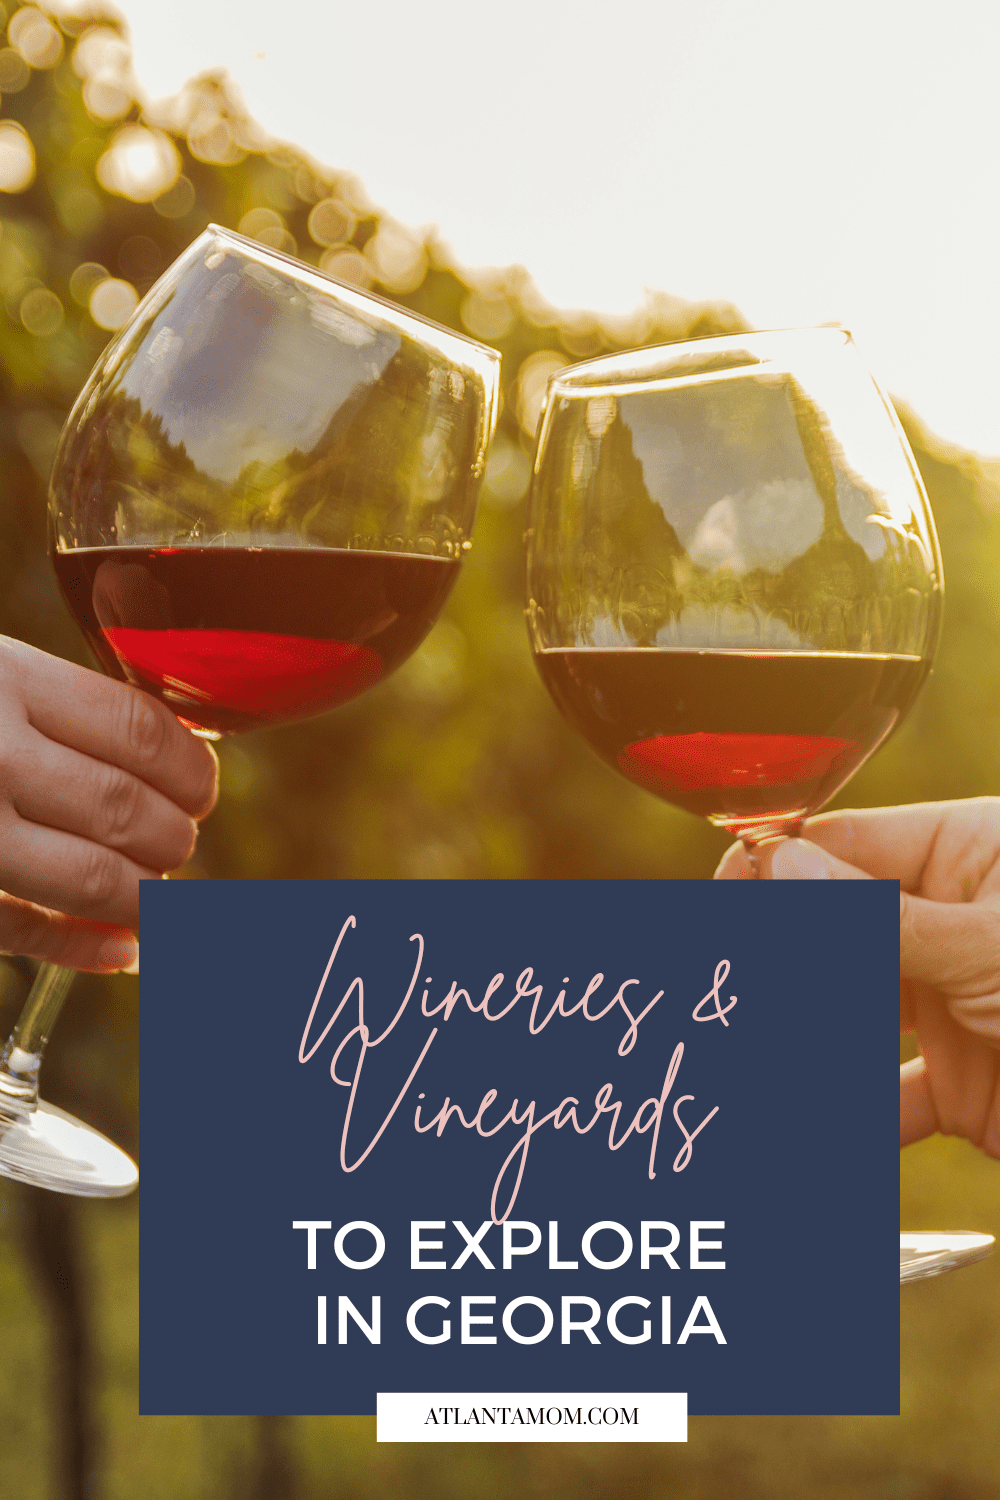 Wineries and Vineyards to Explore in Georgia